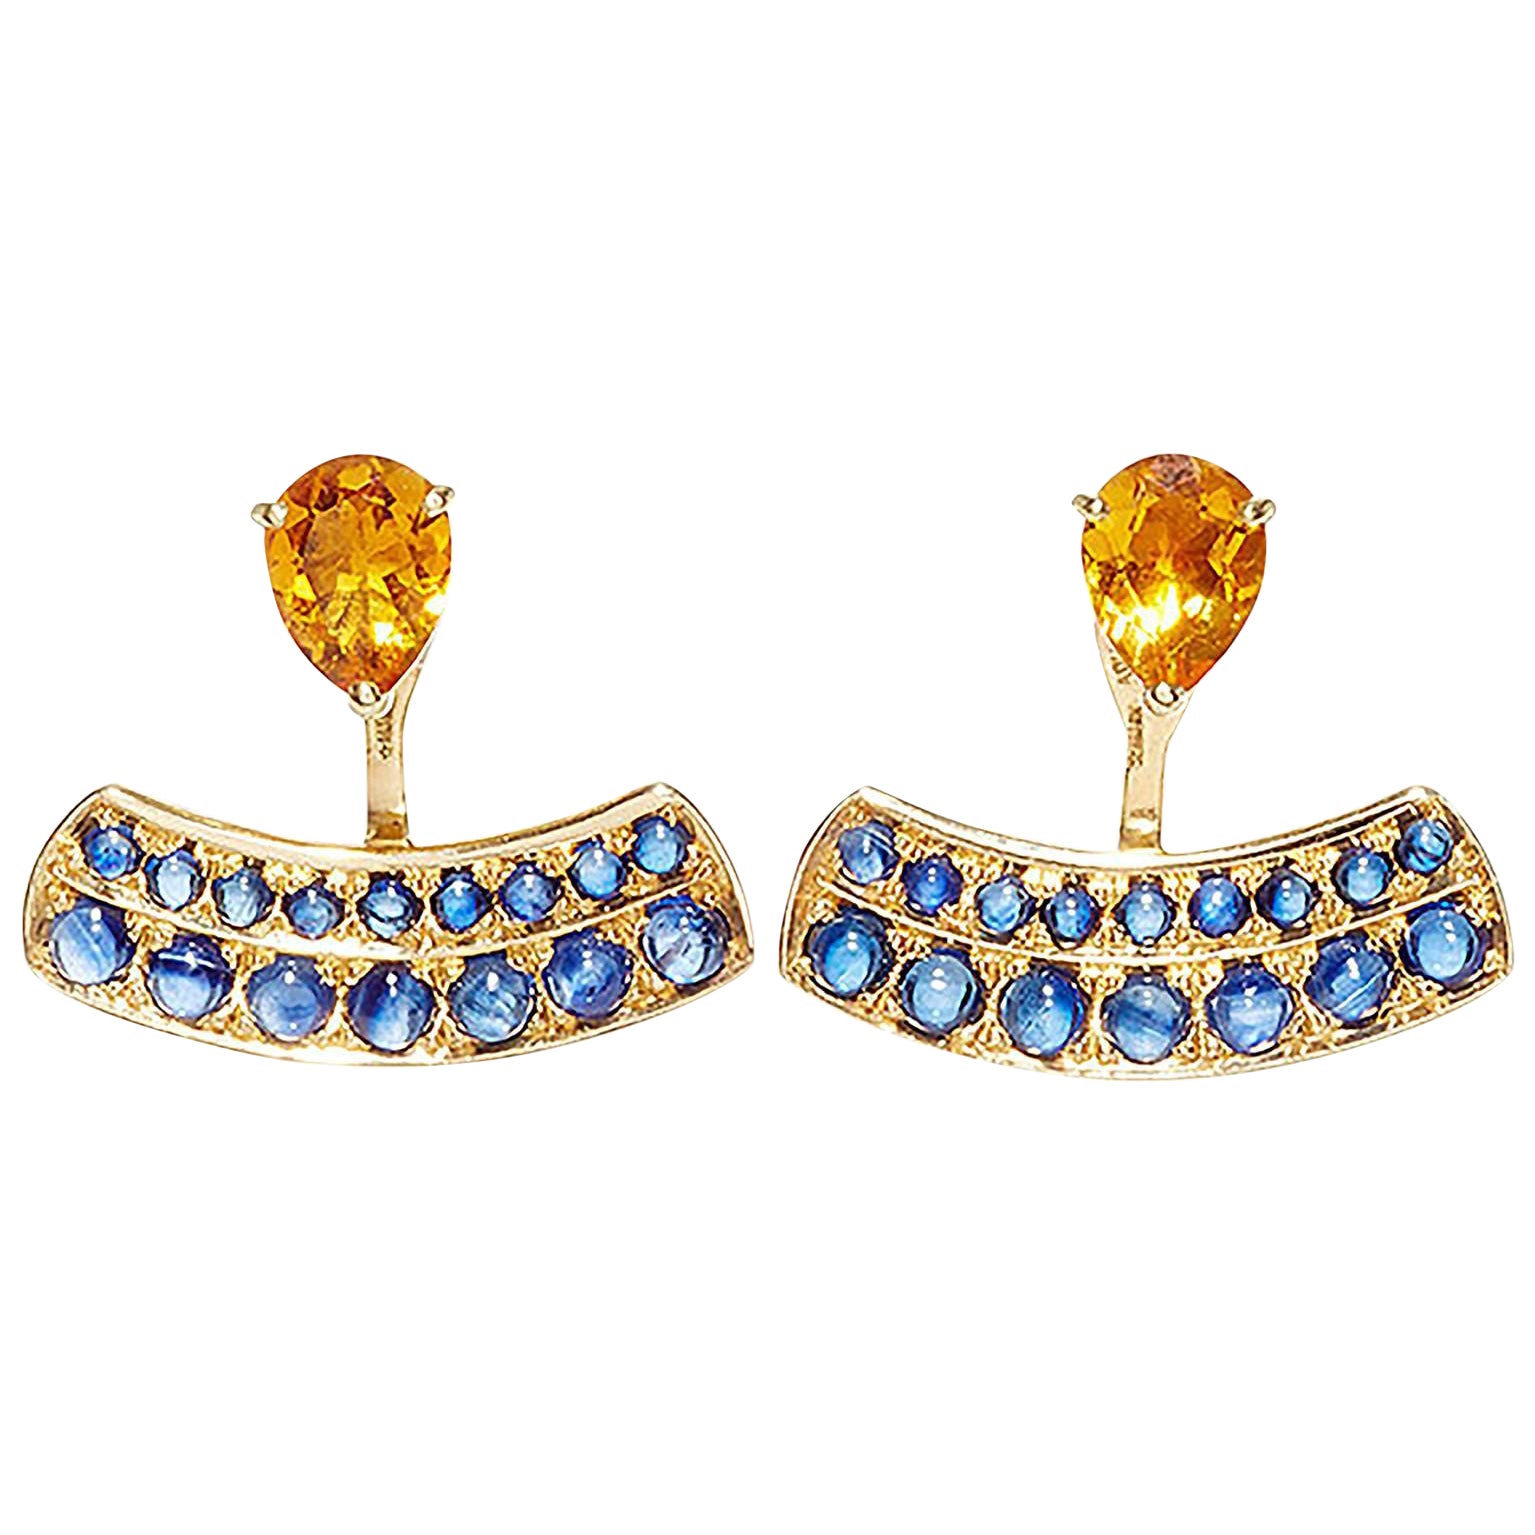 Dubini Theodora Citrine and Blue Sapphire 18K Yellow Gold Earrings For Sale